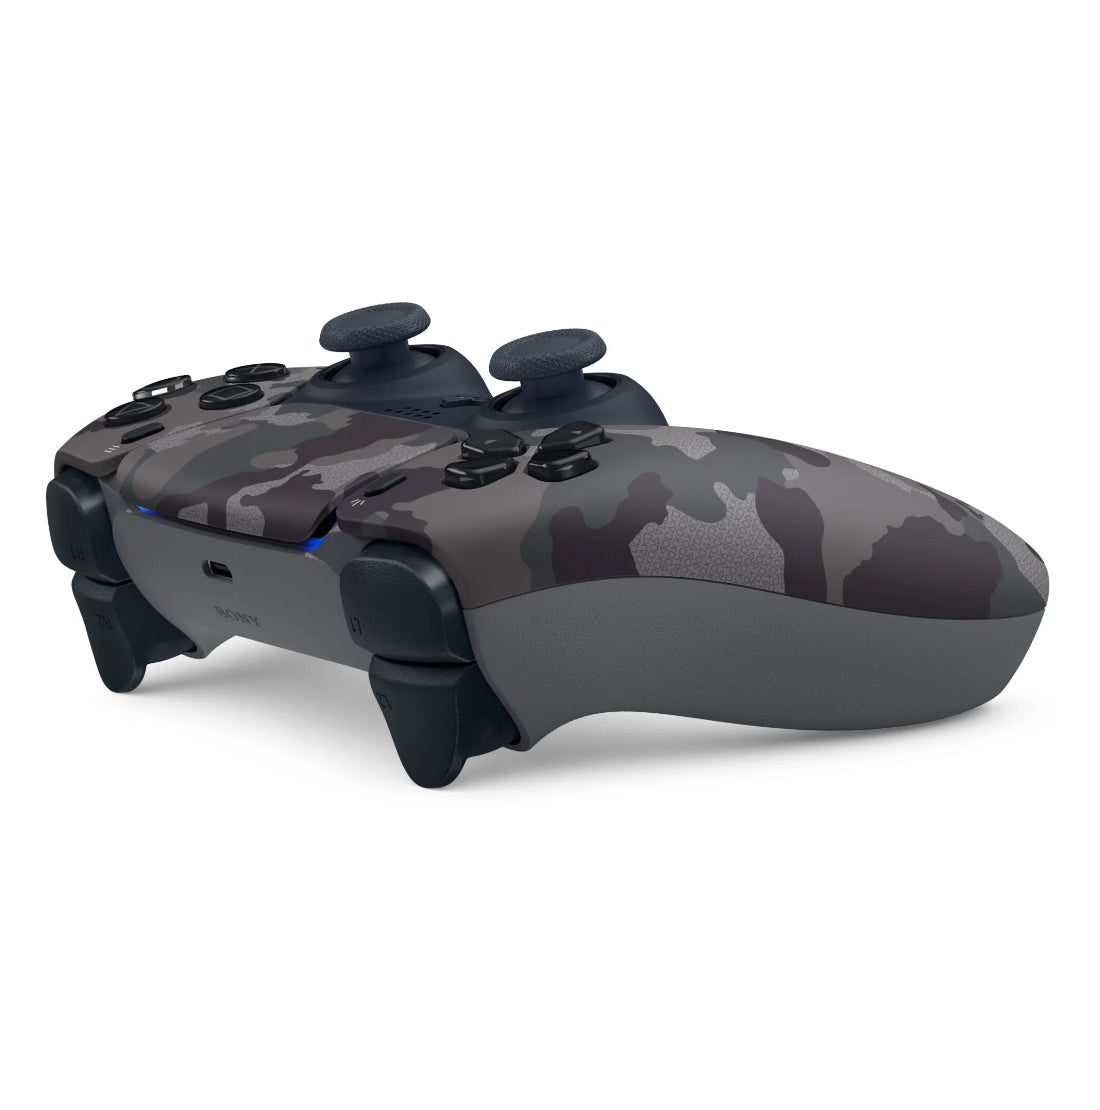 Sony Playstation 5 Digital Edition Bundle with Extra Gray Camo Controller, Black PULSE 3D Wireless Headset and Cleaning Cloth - Pro-Distributing